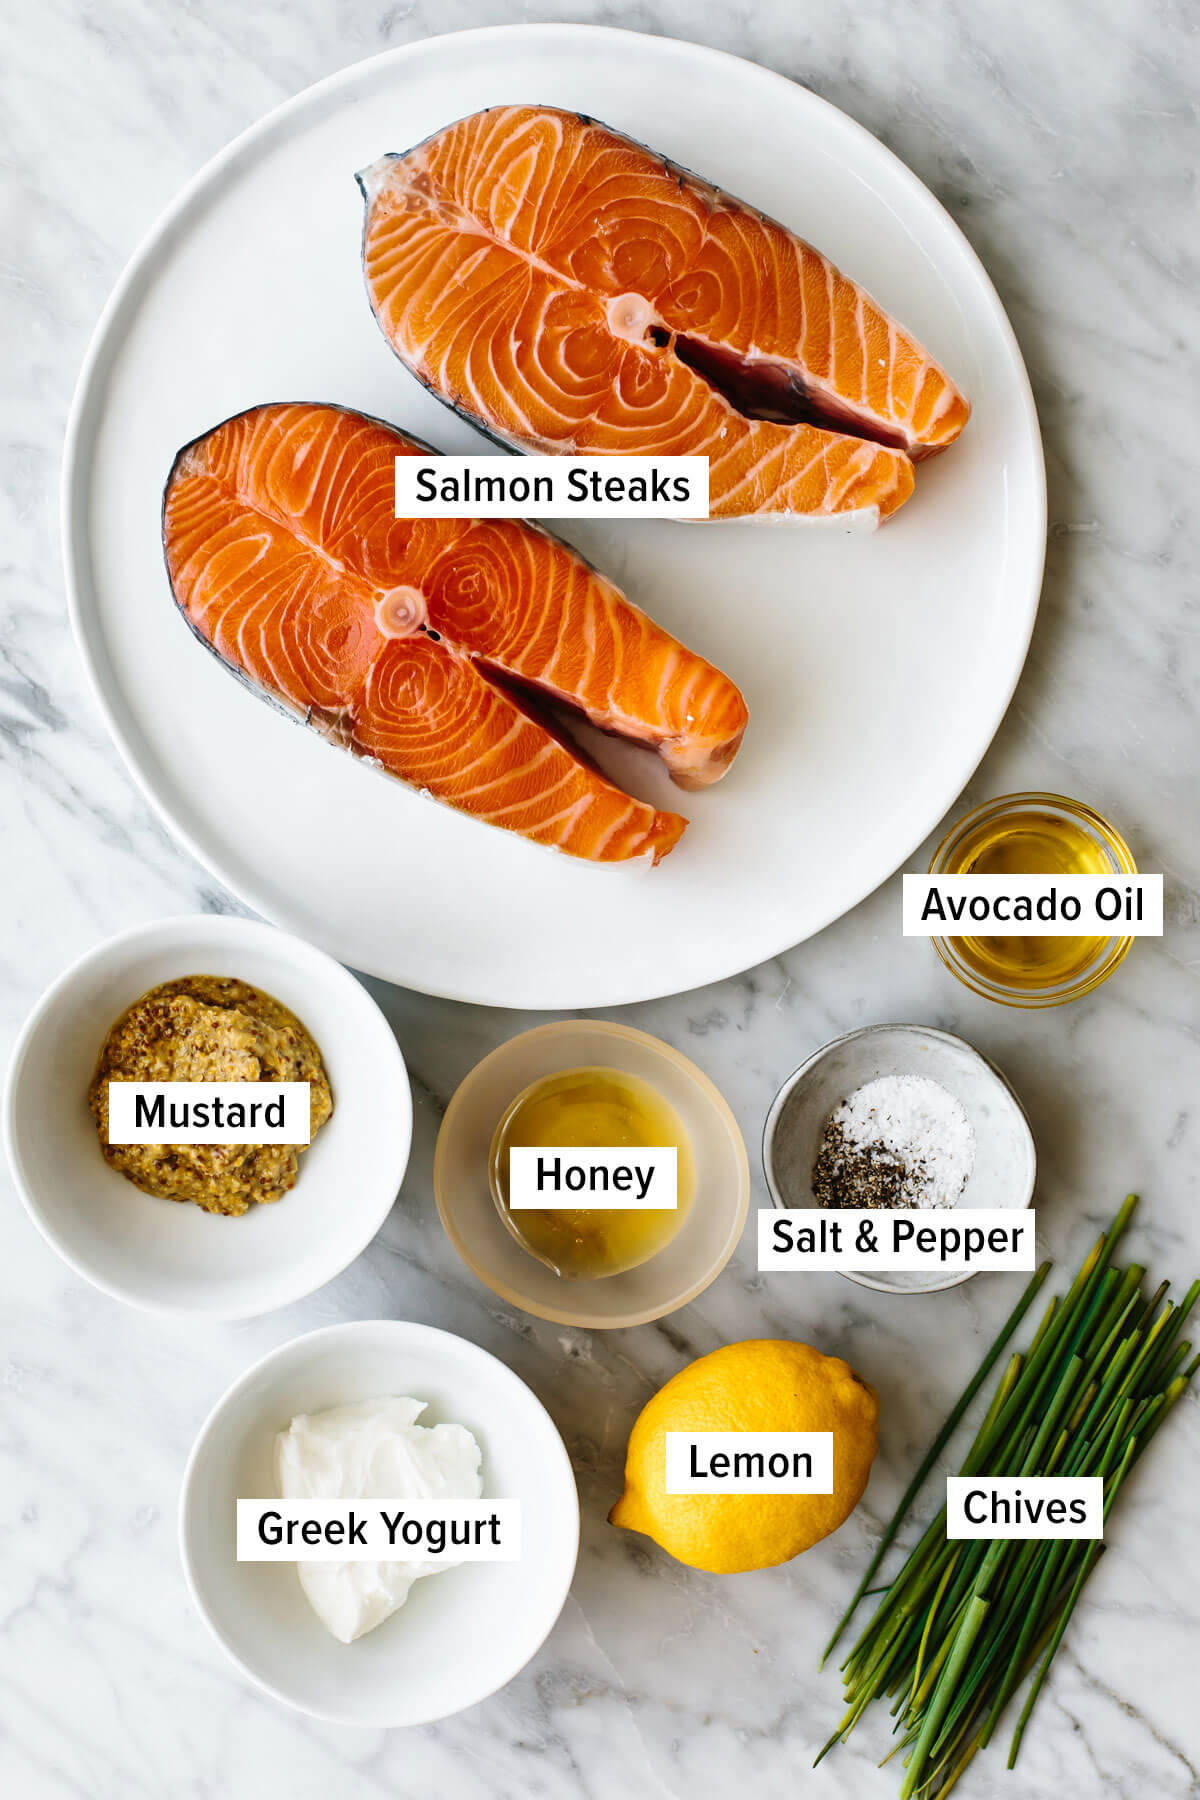 Ingredients for grilled salmon steak on a table.